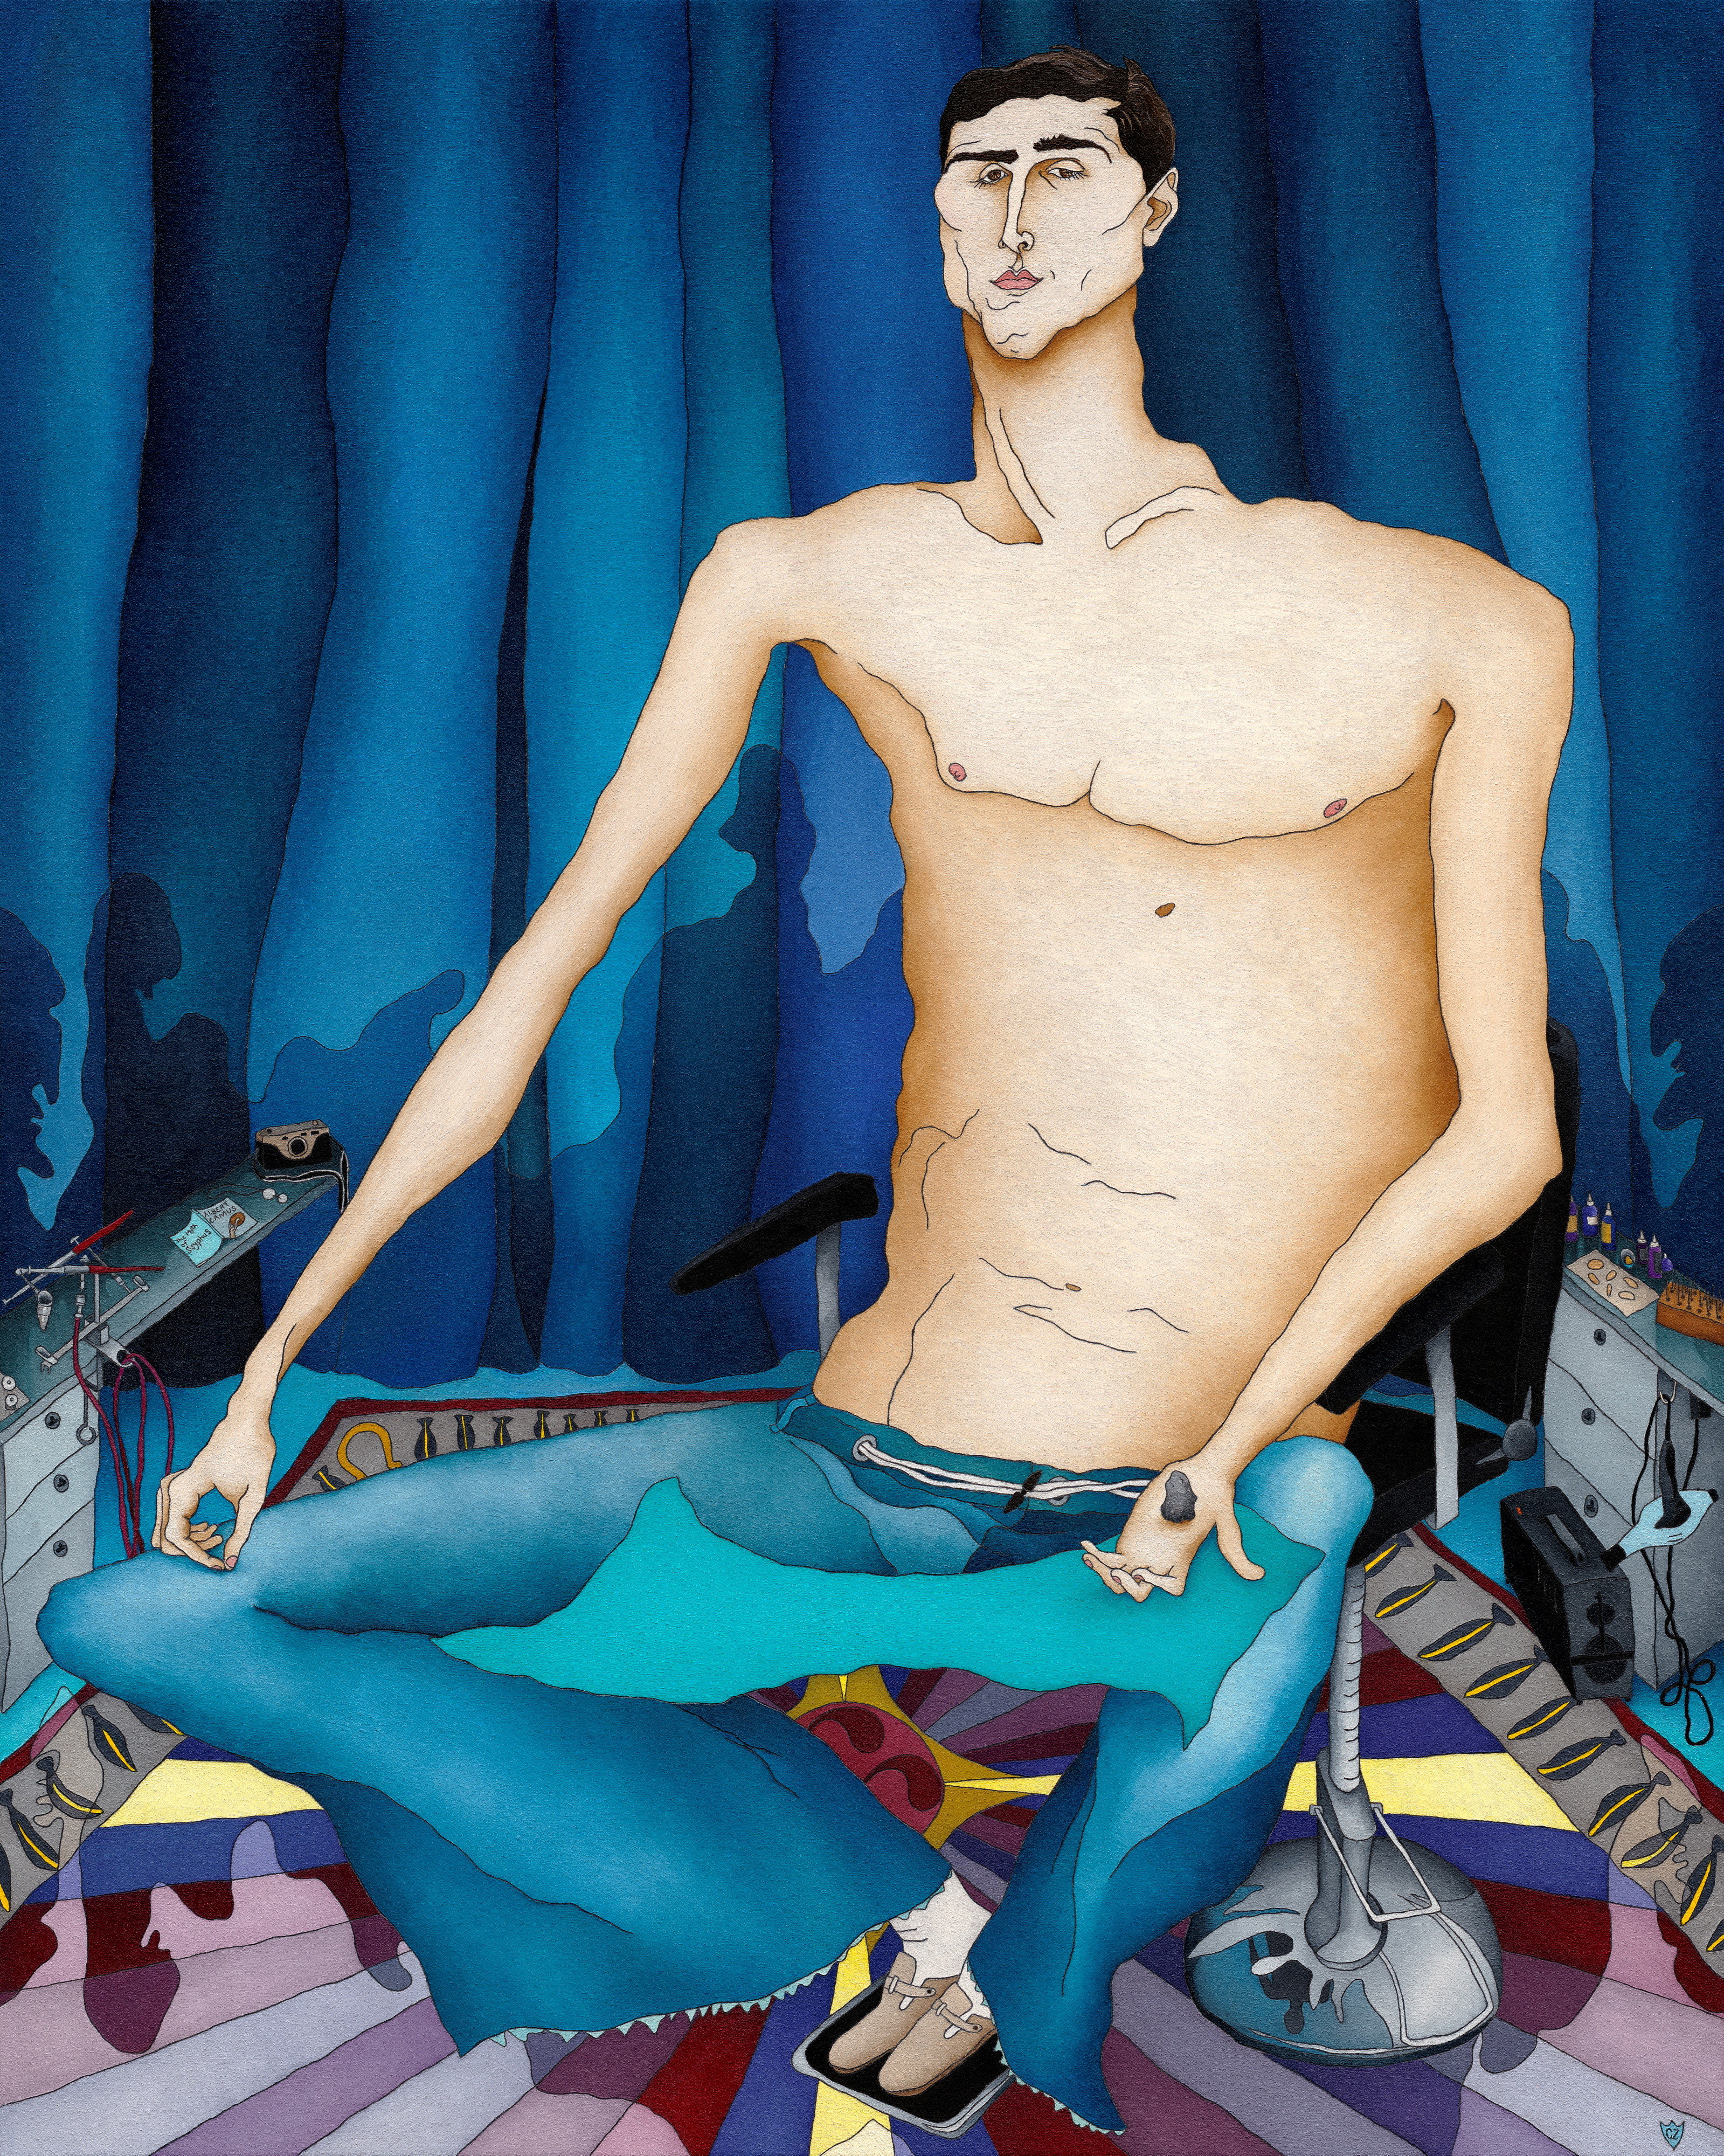 A slightly abstract portrait of Jacob Elordi, sitting topless and wearing blue jeans against a blue curtain.